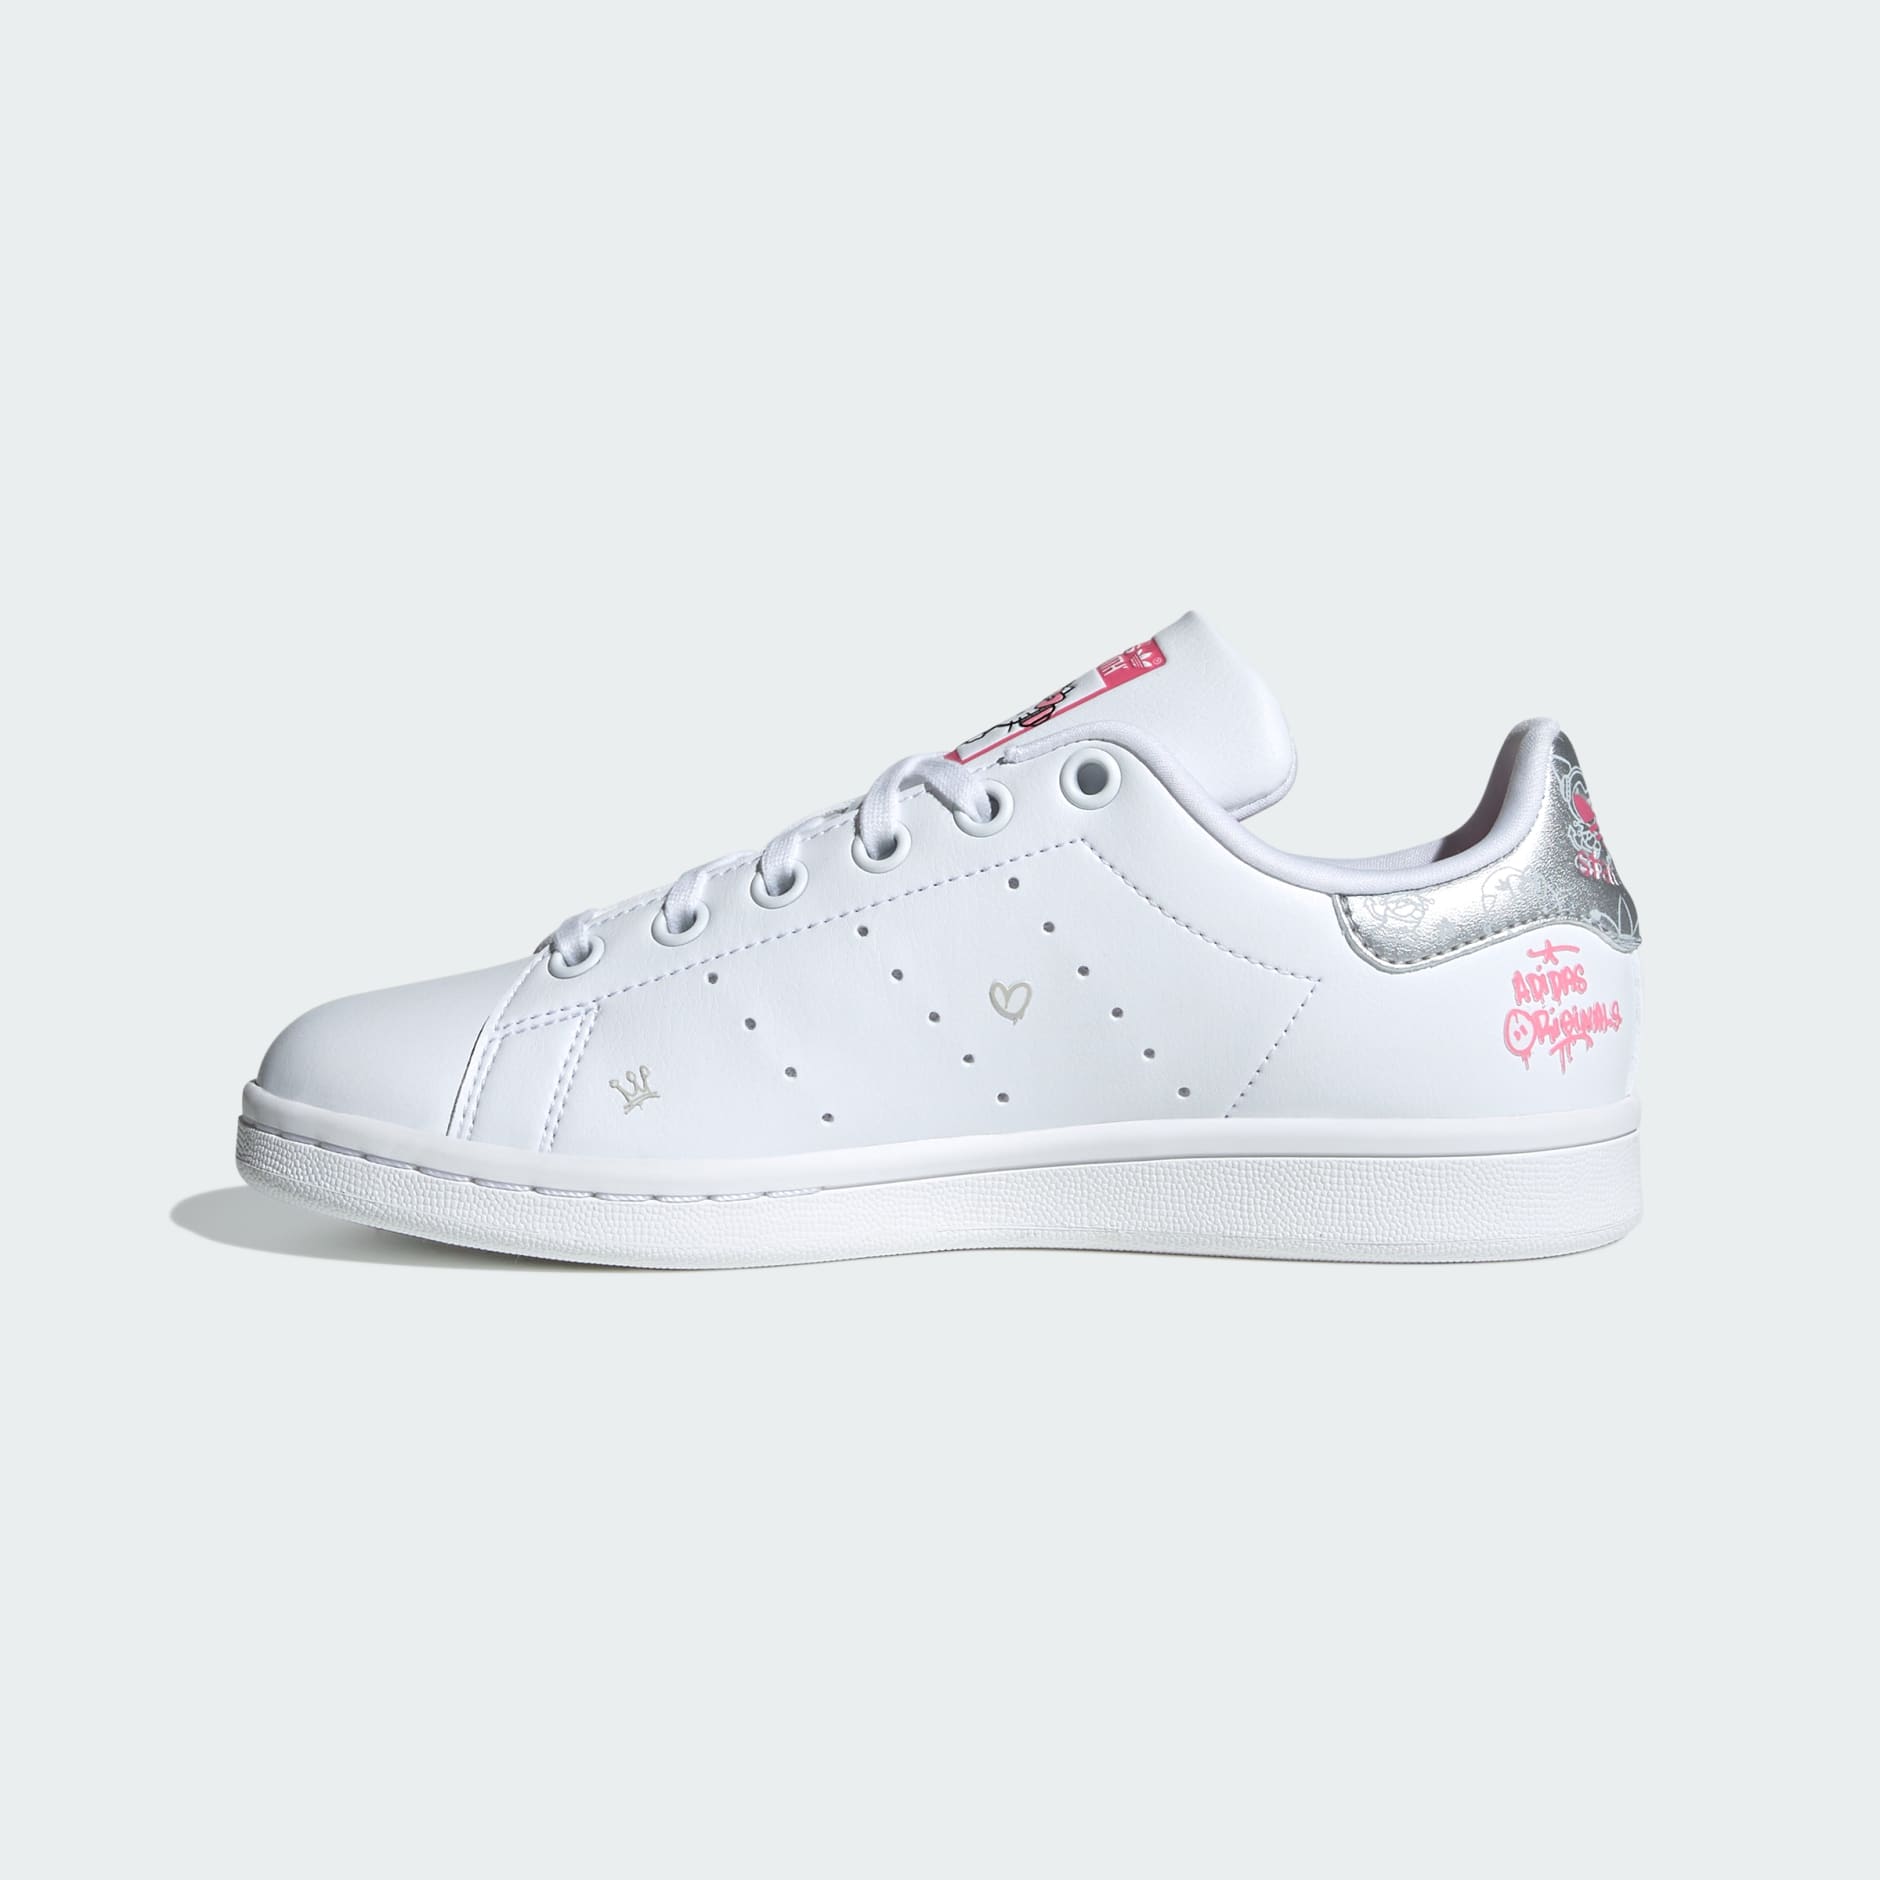 adidas adidas Originals x Hello Kitty and Friends Stan Smith Shoes ...